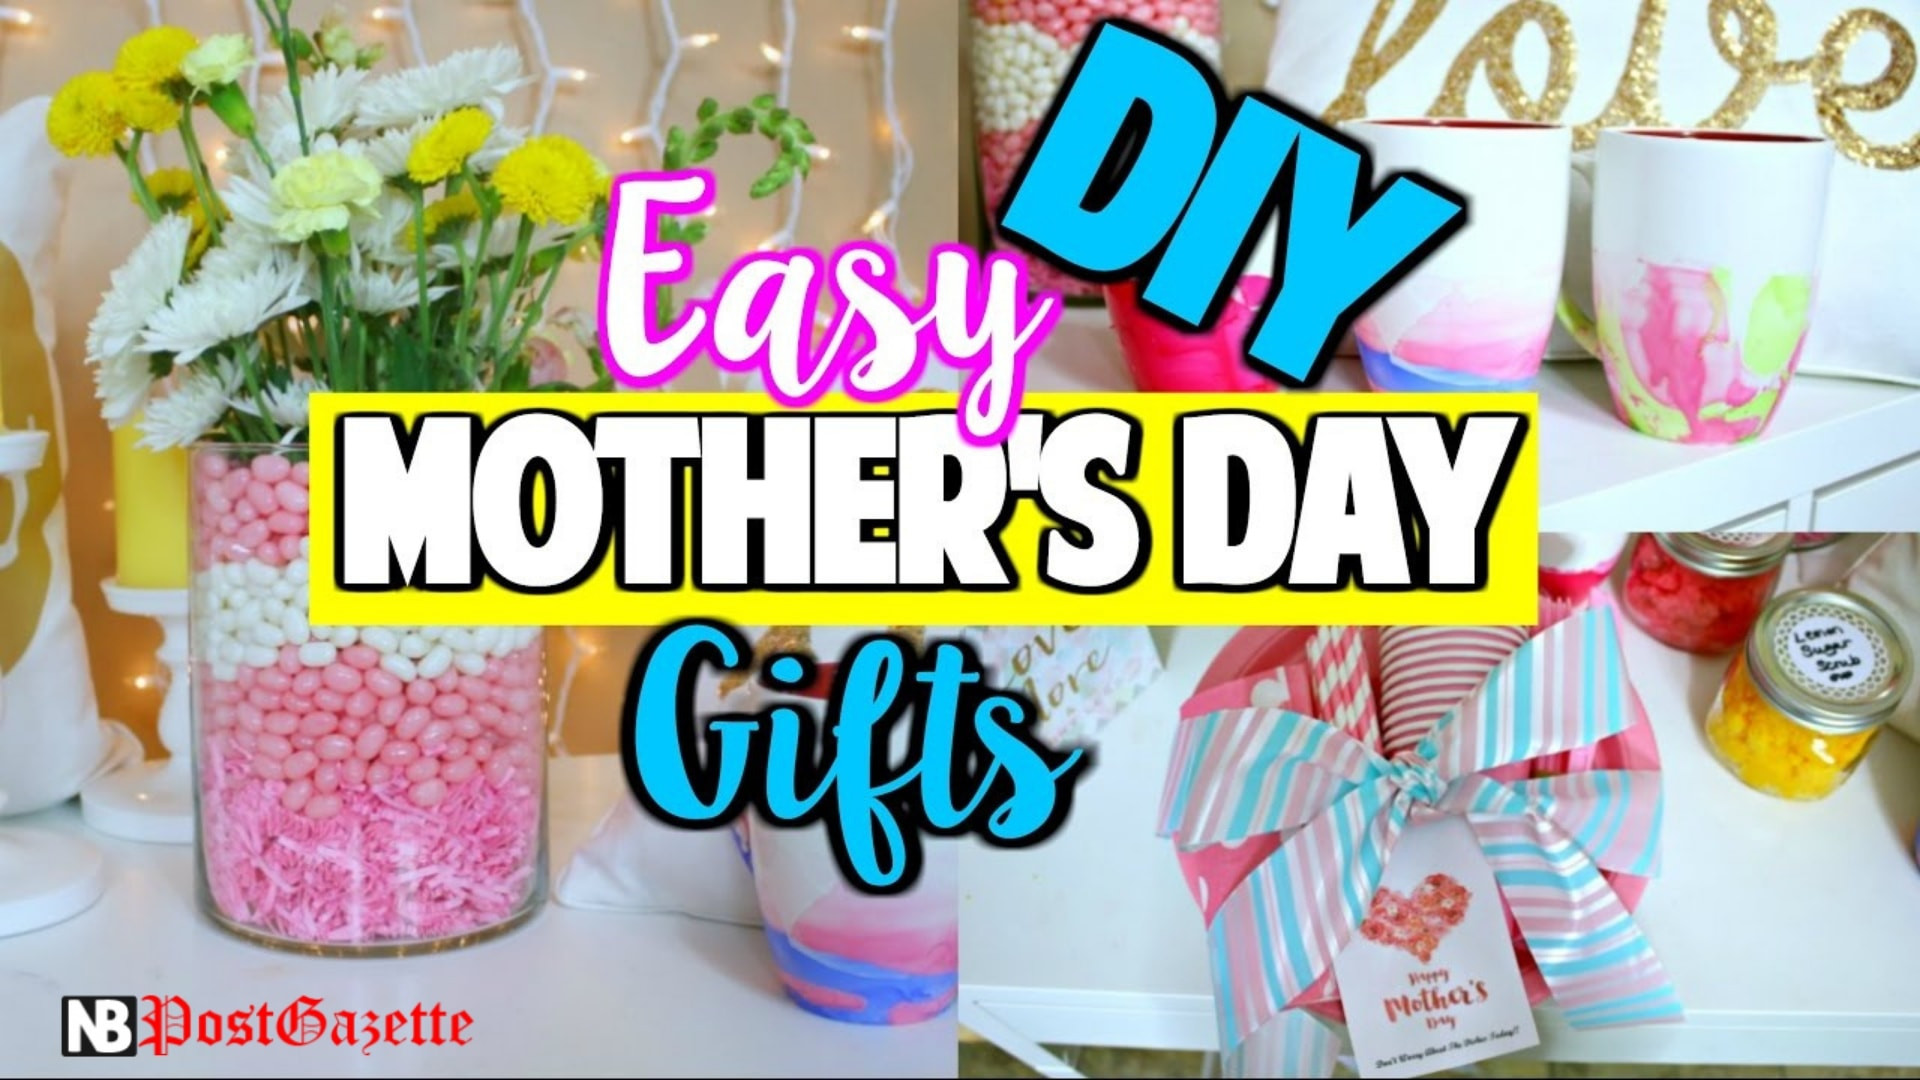 Last Minute Mothers Day Gift
 These Are The Best Last Minute Mother s Day Gift Ideas 2019